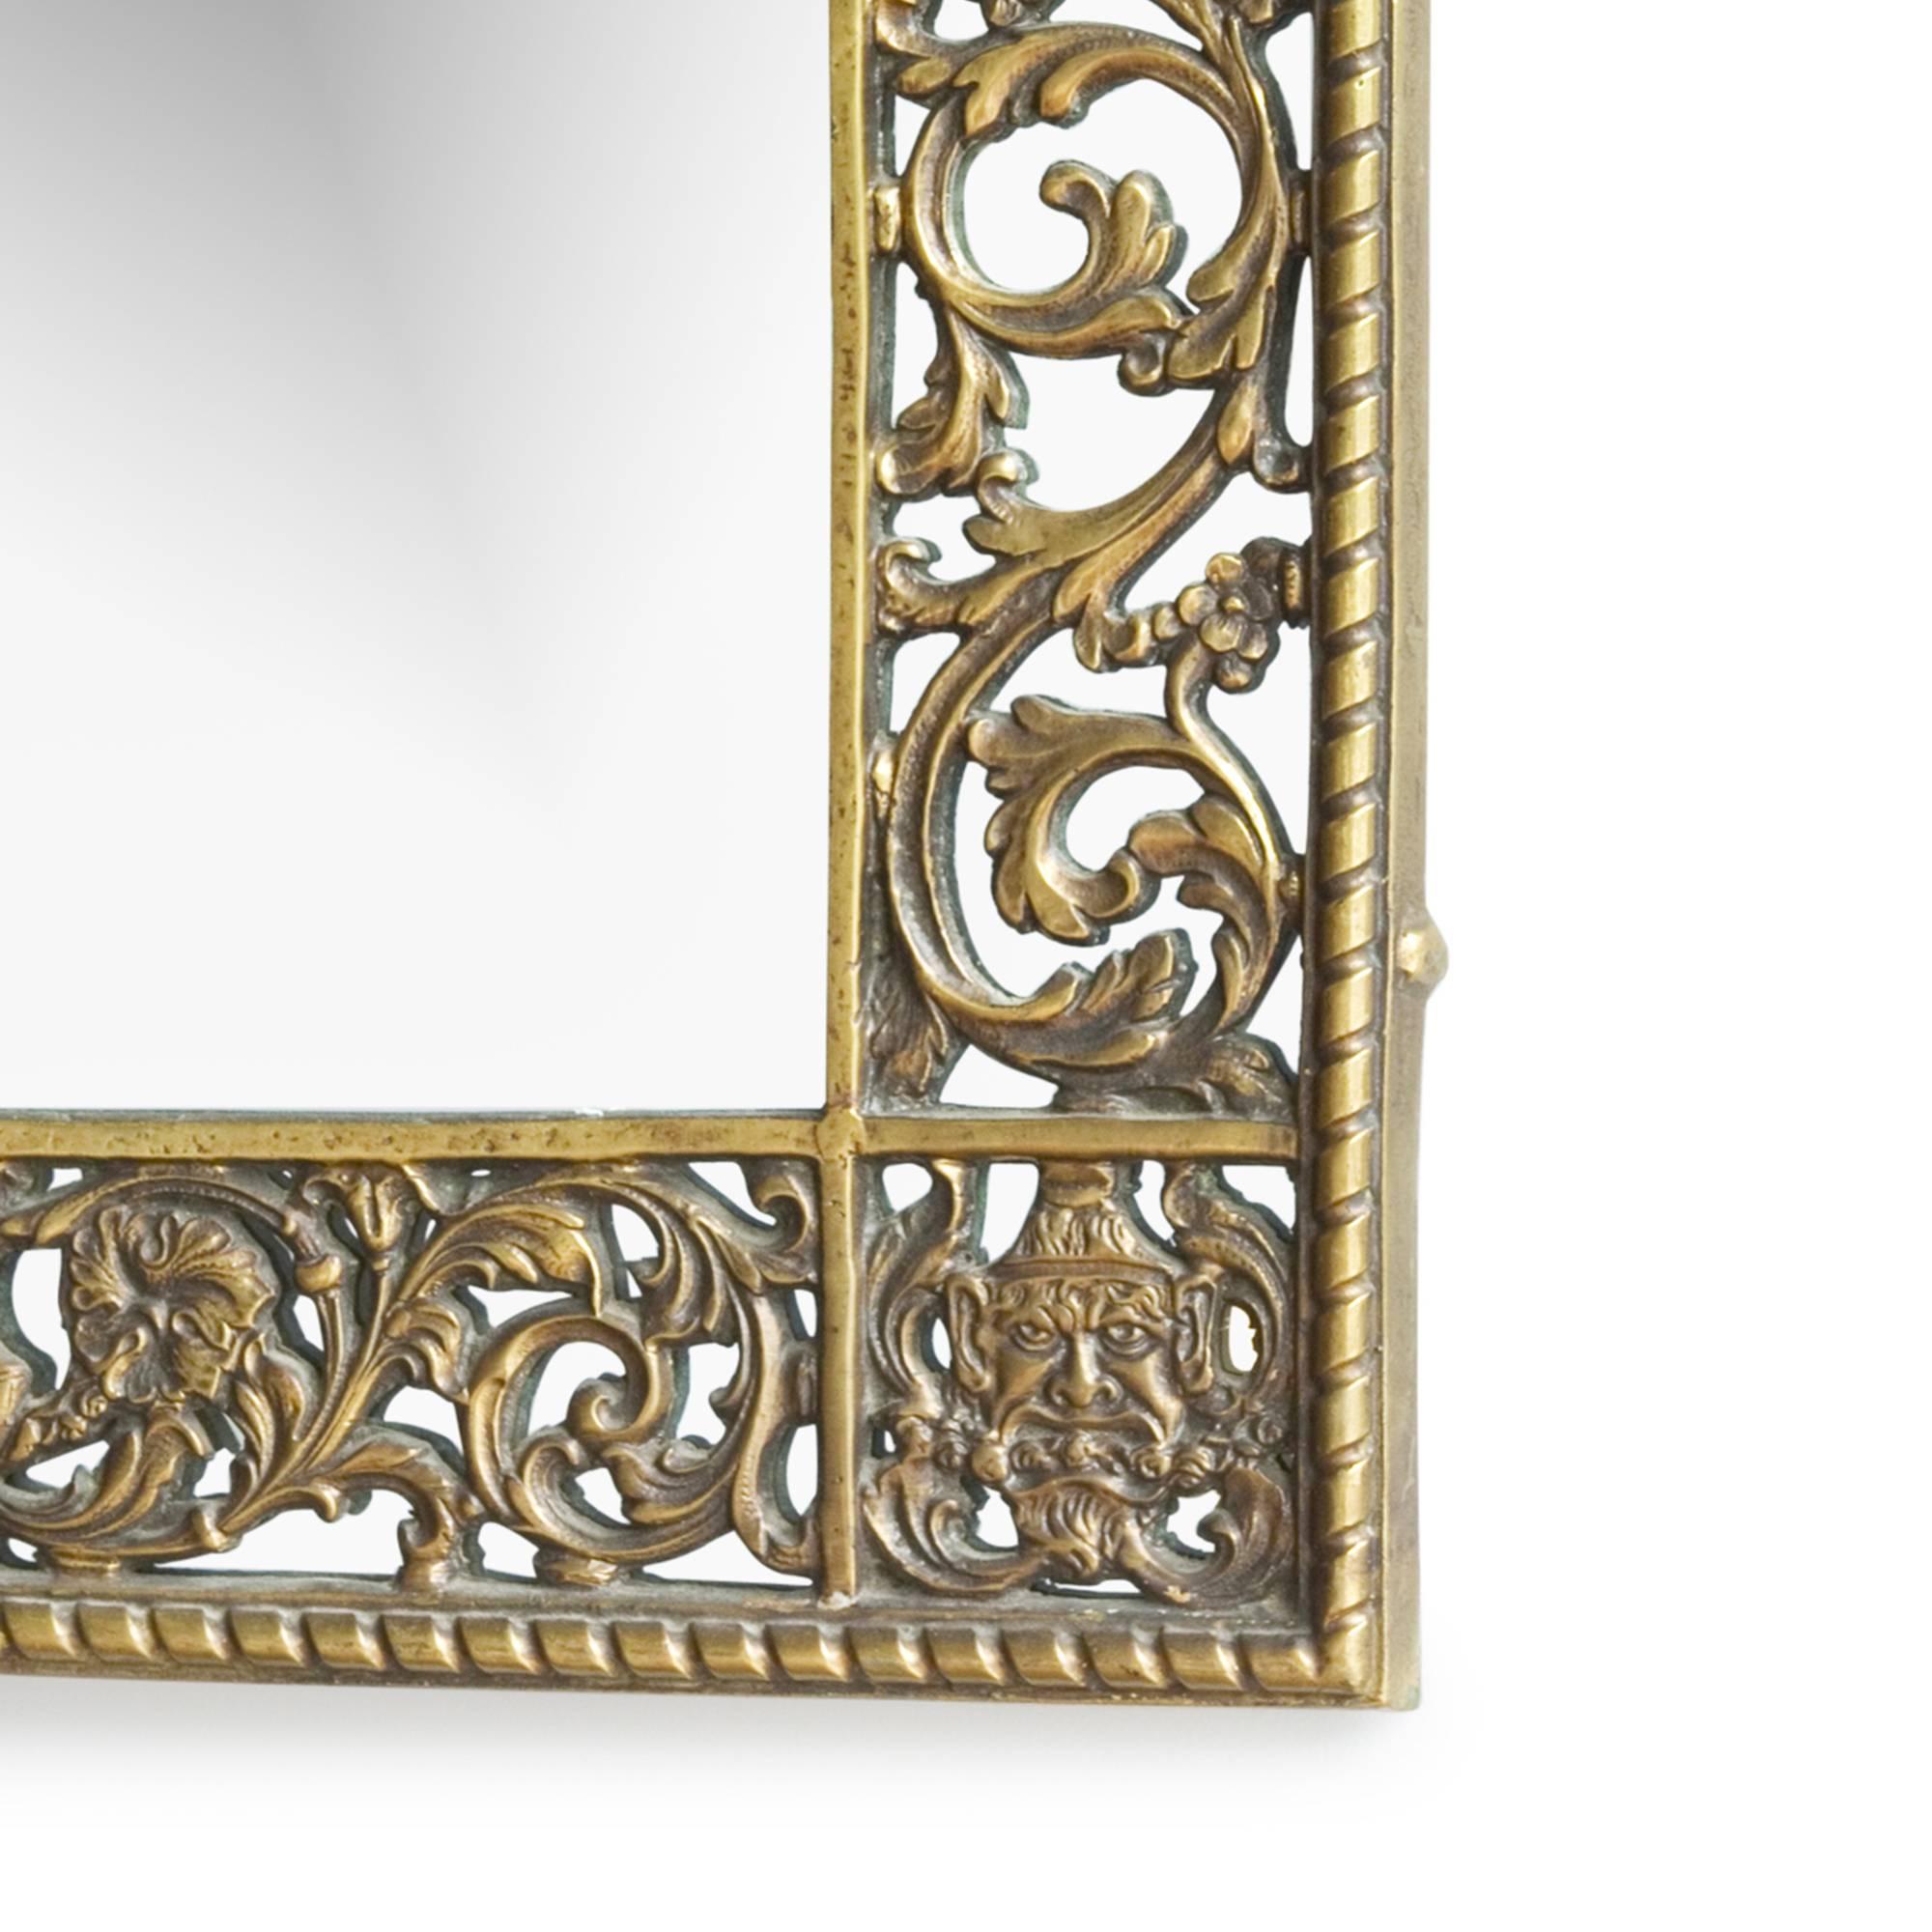 Cast bronze arched top foliate and figural form frame mirror, detailng  masks, urns and scrolling leafage, by Oscar Bach, American 1920s. Height 34 1/4 in, width 18 3/4 in. (Item #1692)
